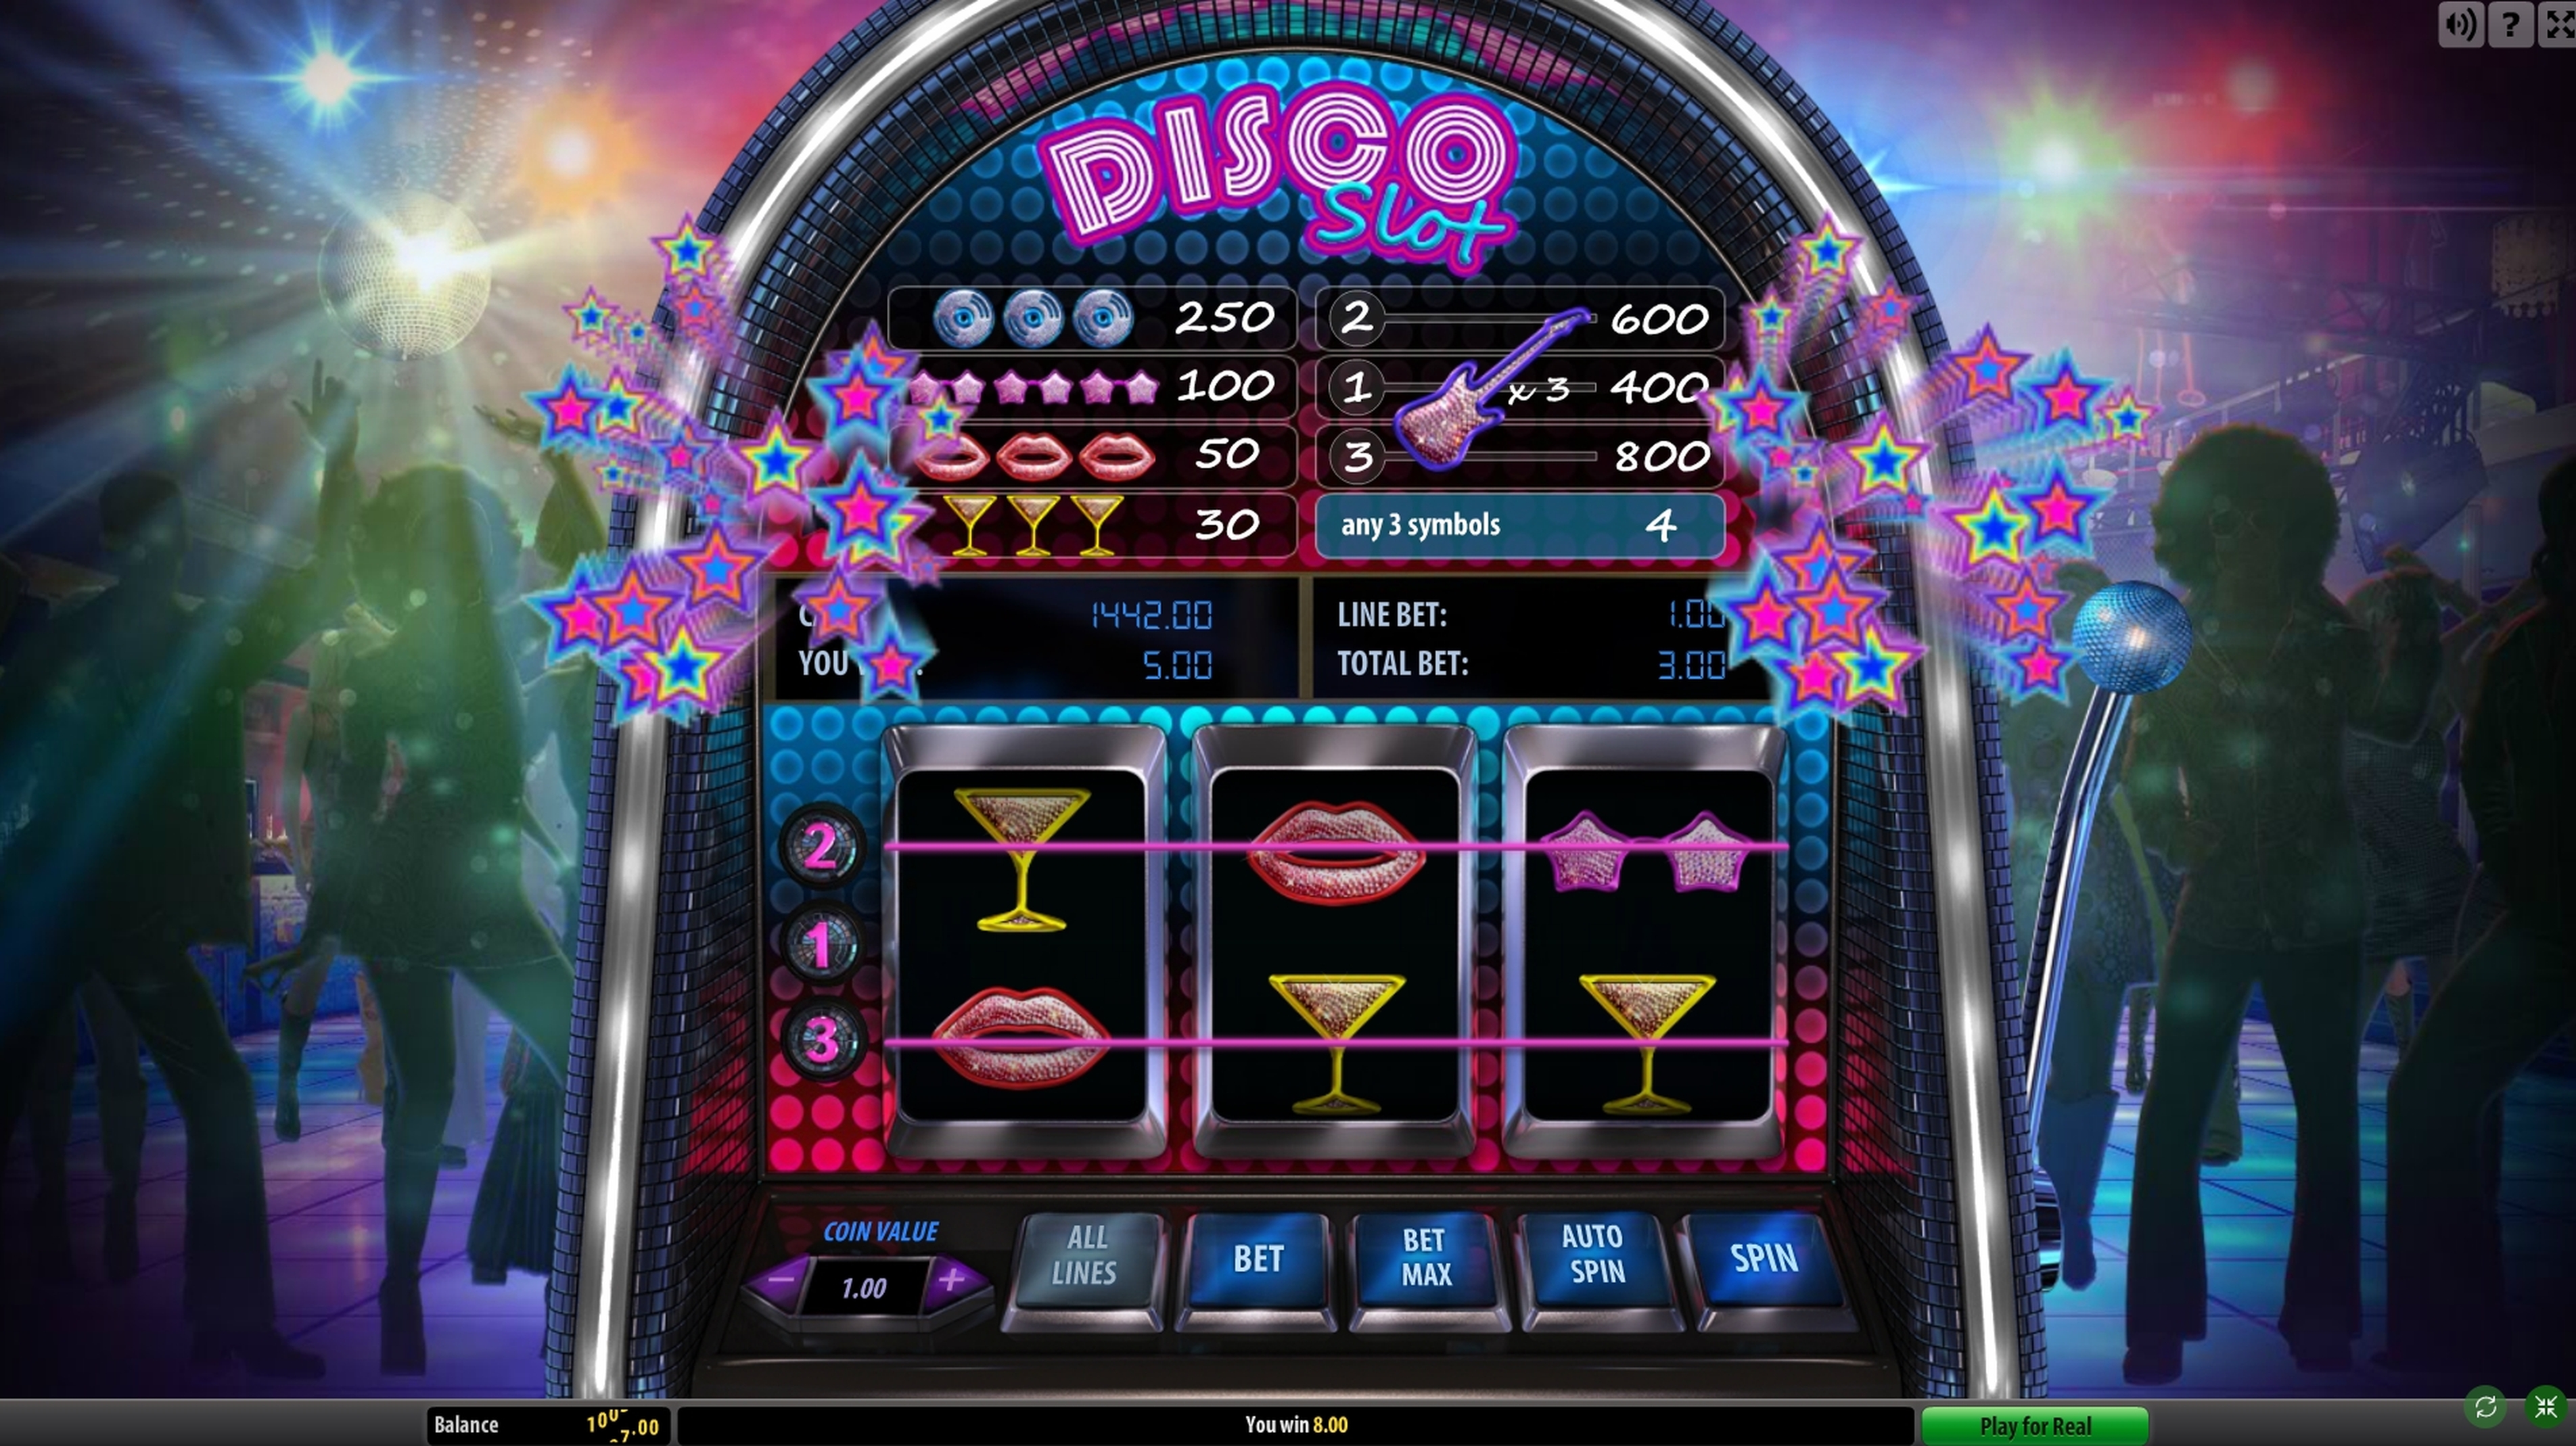 Win Money in Disco Slot Free Slot Game by Gamescale Software